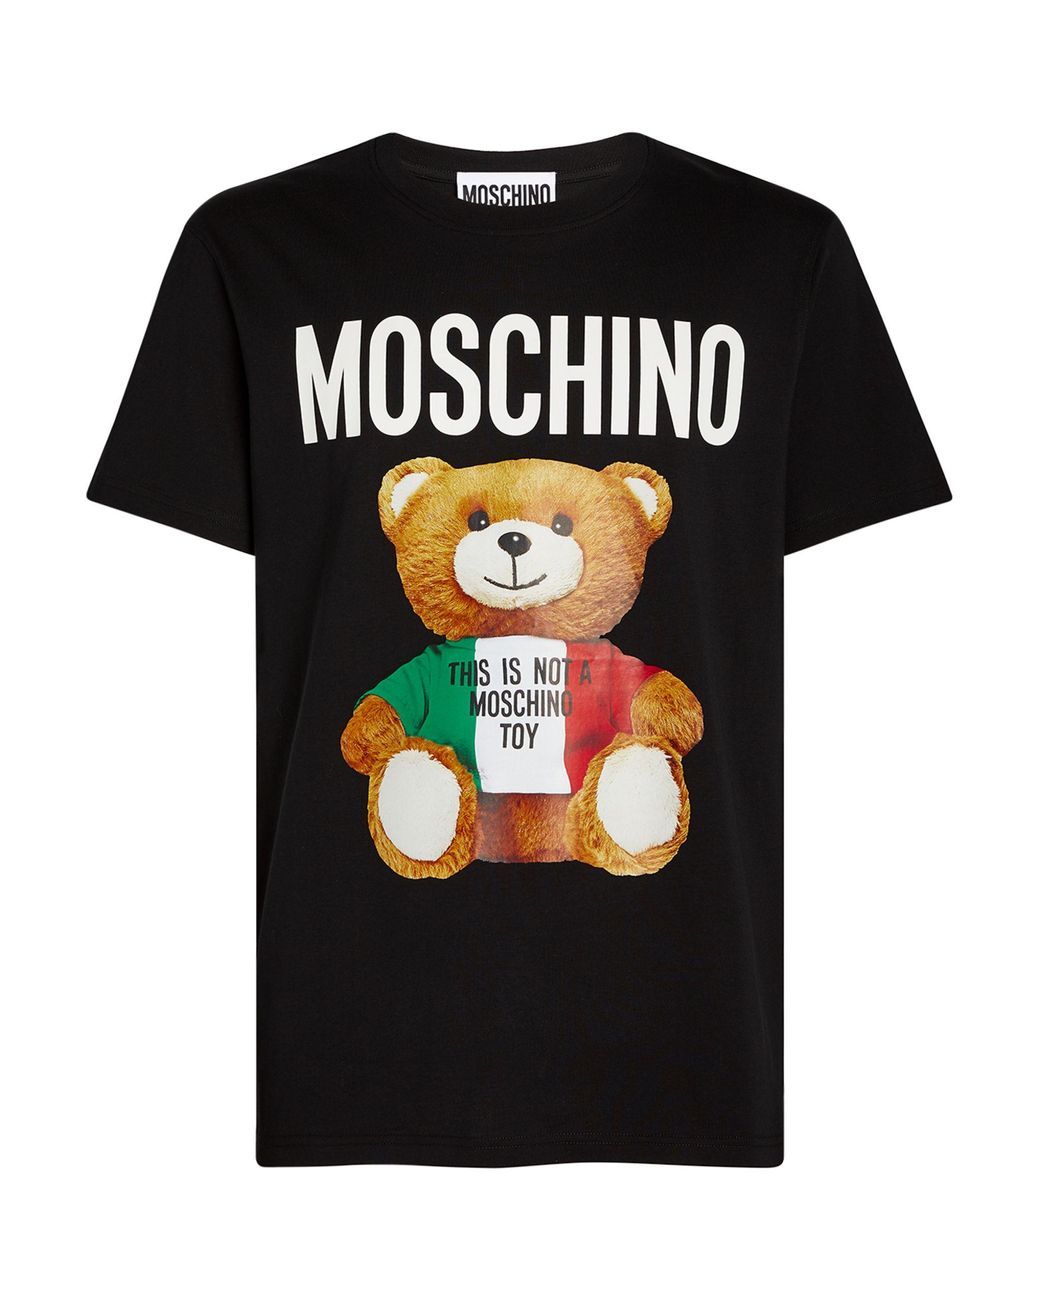 Moschino Cotton Teddy Bear T-shirt in Black for Men - Lyst